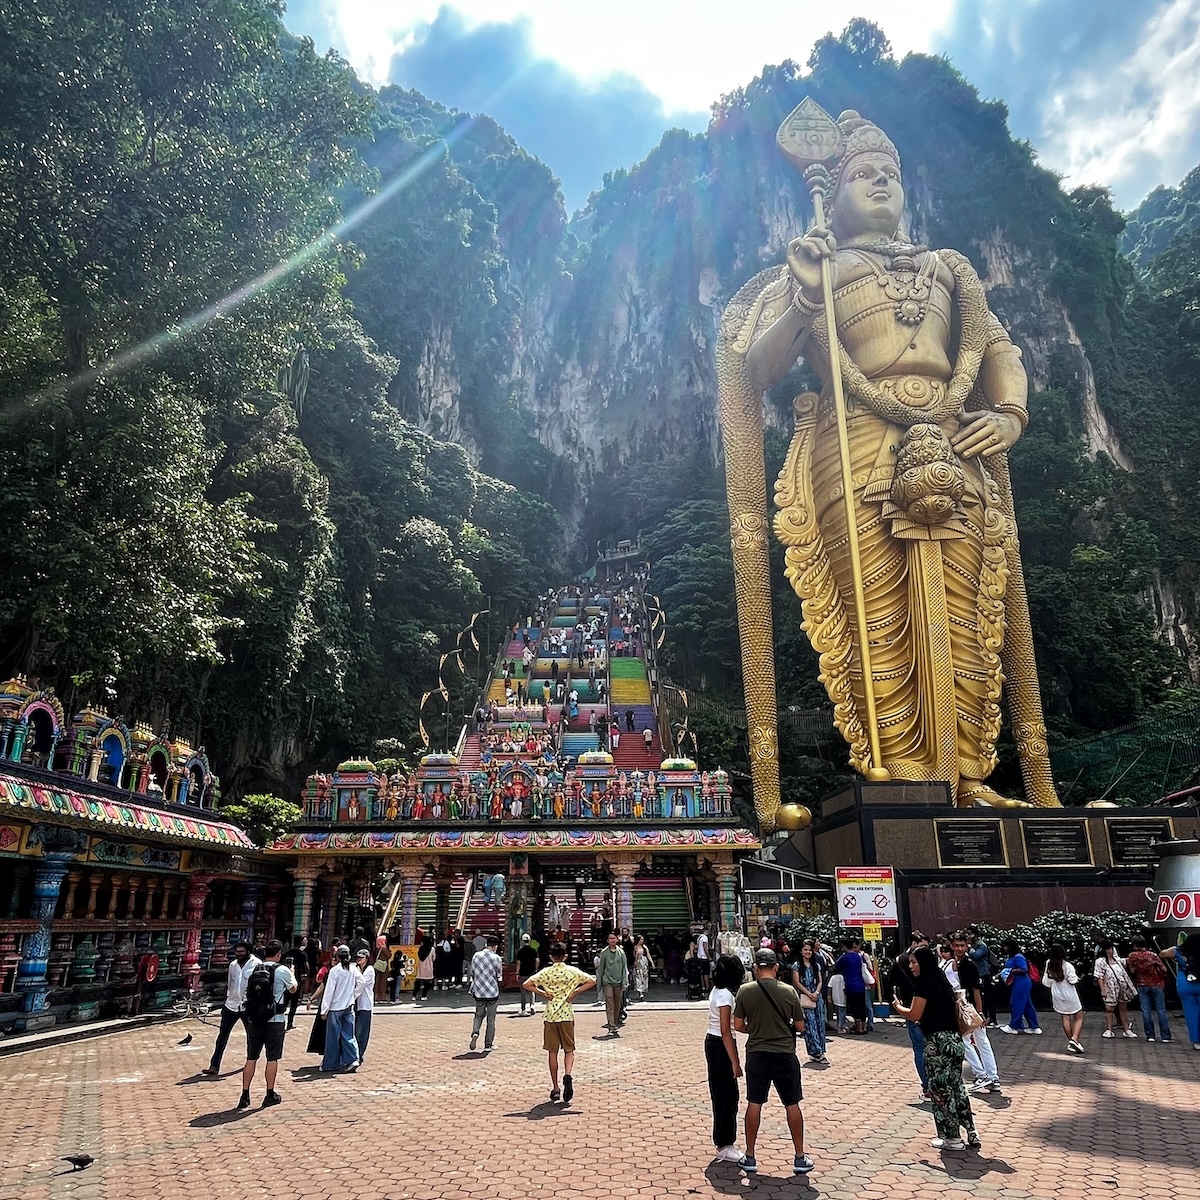 Visitors at the Batu Caves in Malaysia, with the towering golden statue of Lord Murugan and the vibrant, colorful staircase leading up to the caves set against a backdrop of lush green cliffs